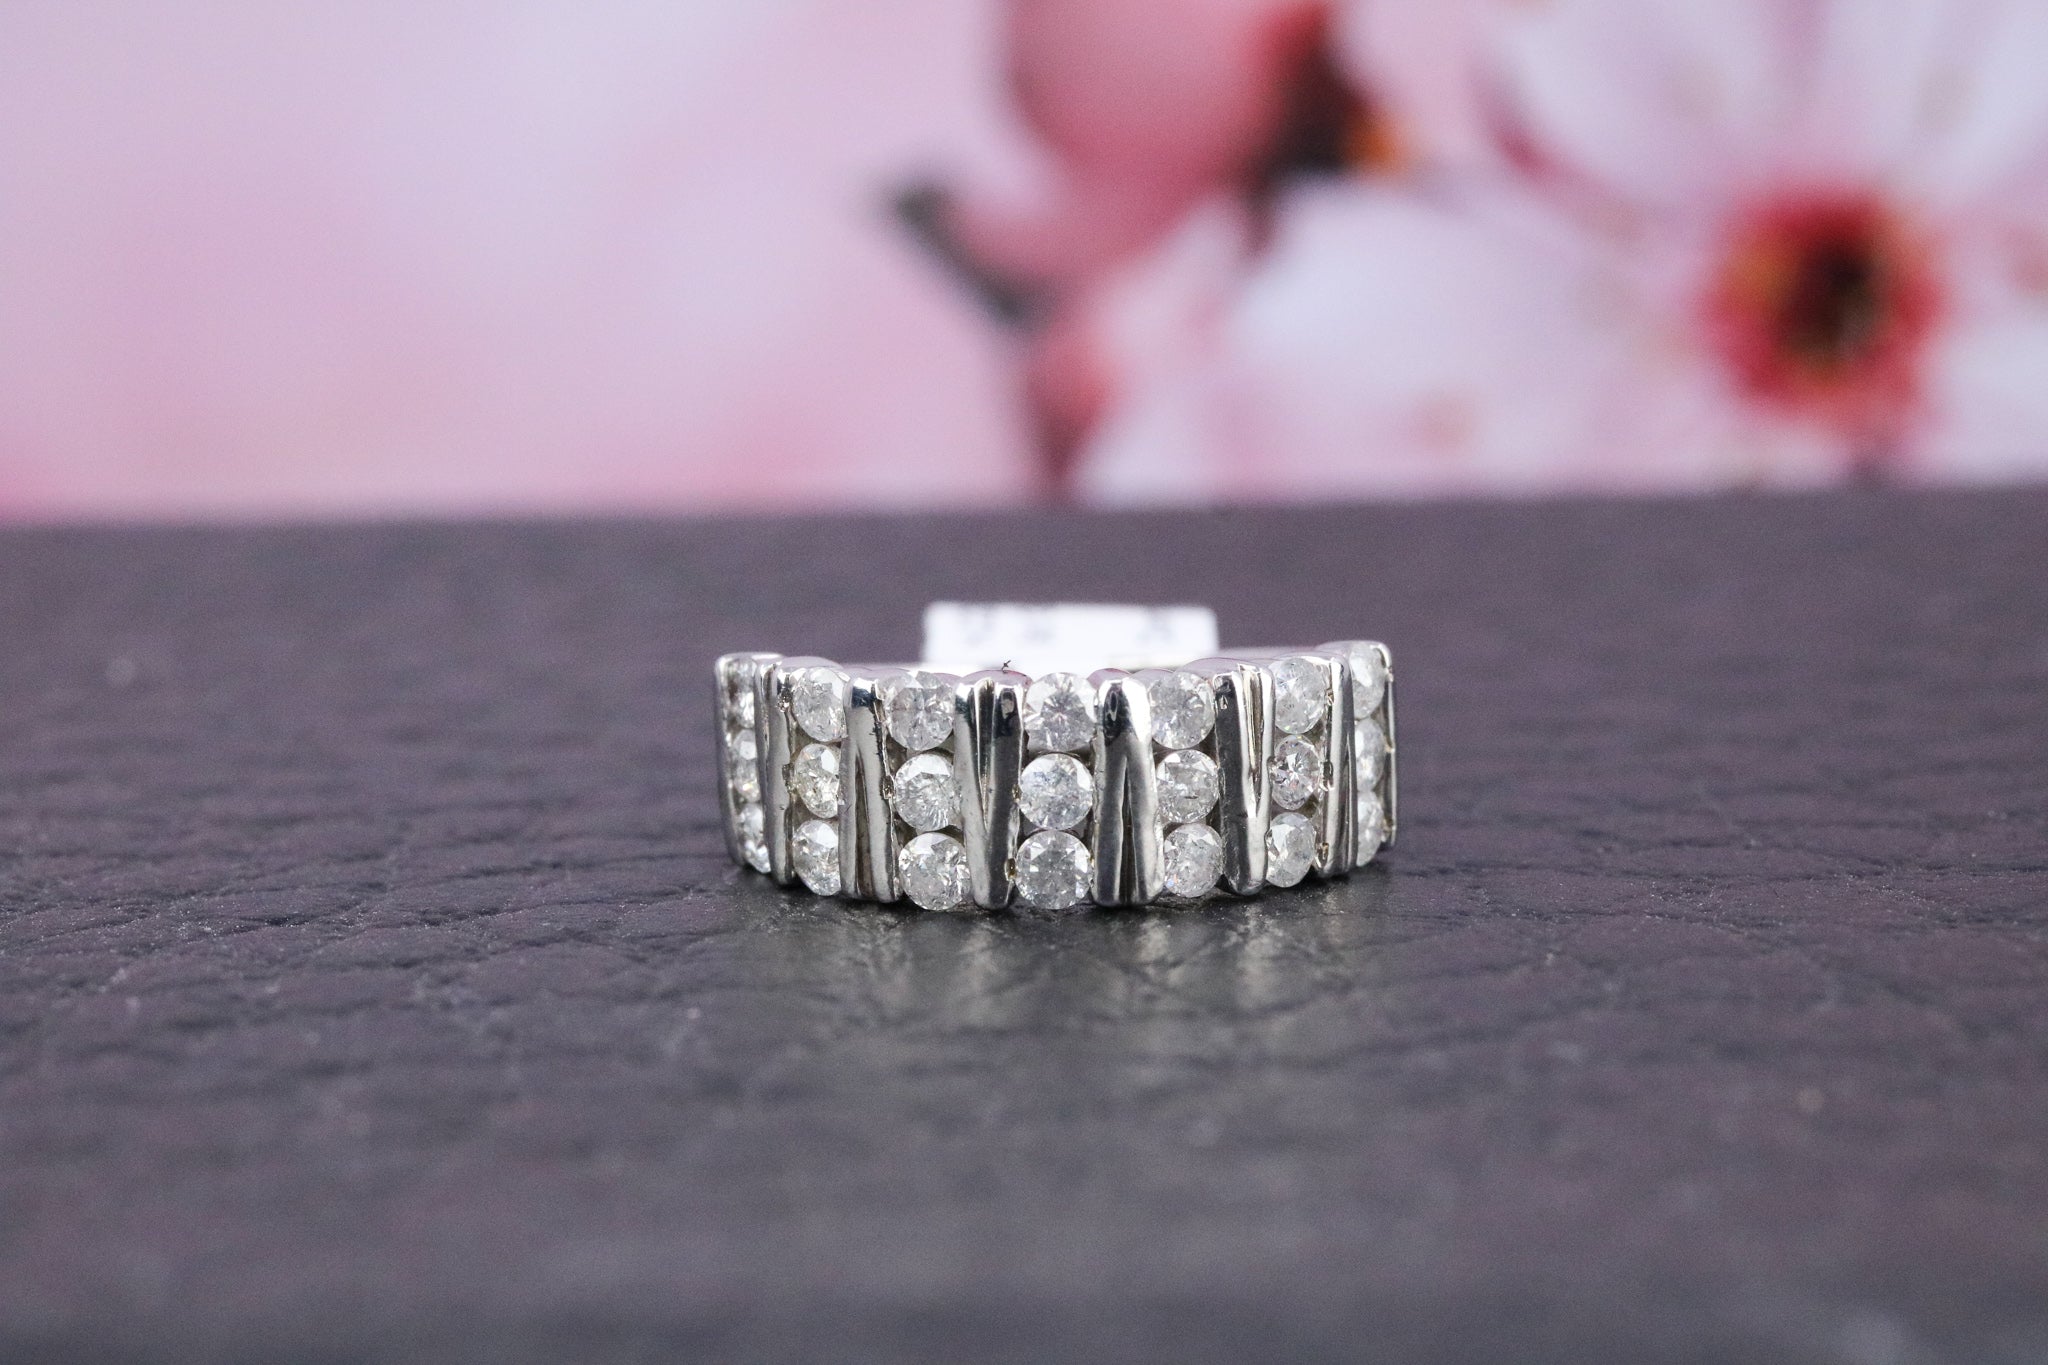 9ct White Gold Diamond Ring - HJ2283 - Hallmark Jewellers Formby & The Jewellers Bench Widnes